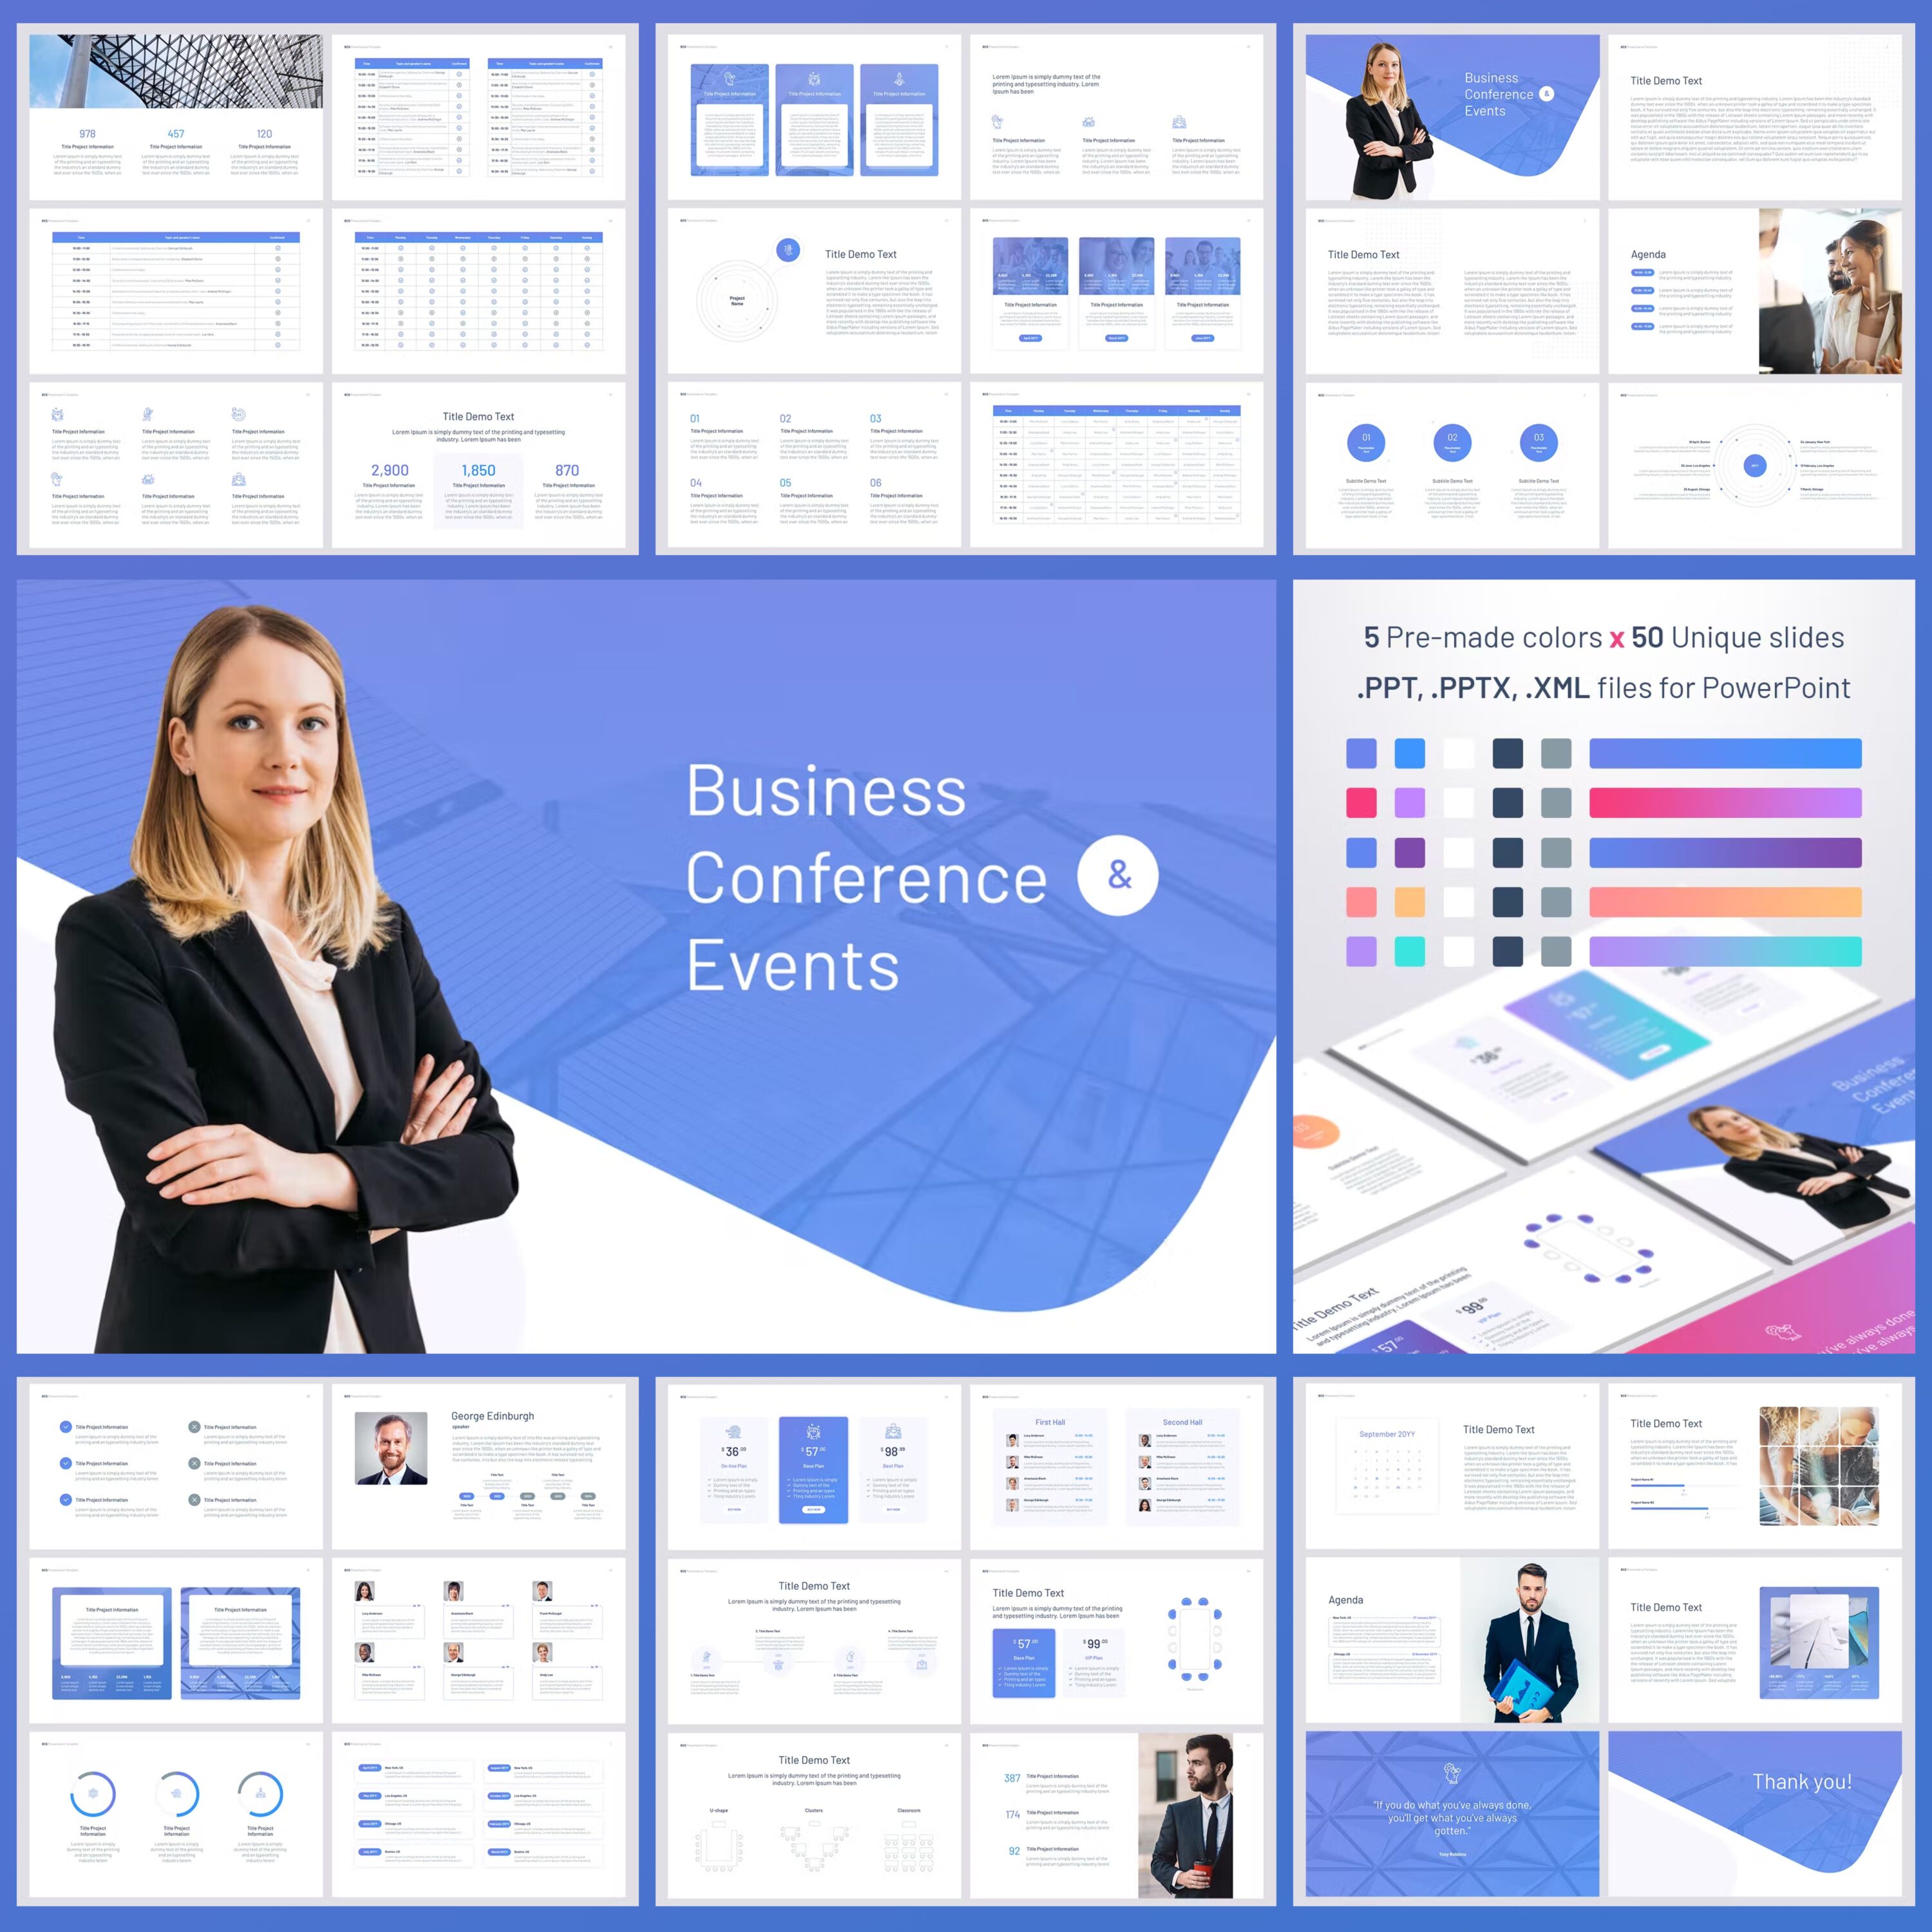 Business conferences events powerpoint template illustrations.